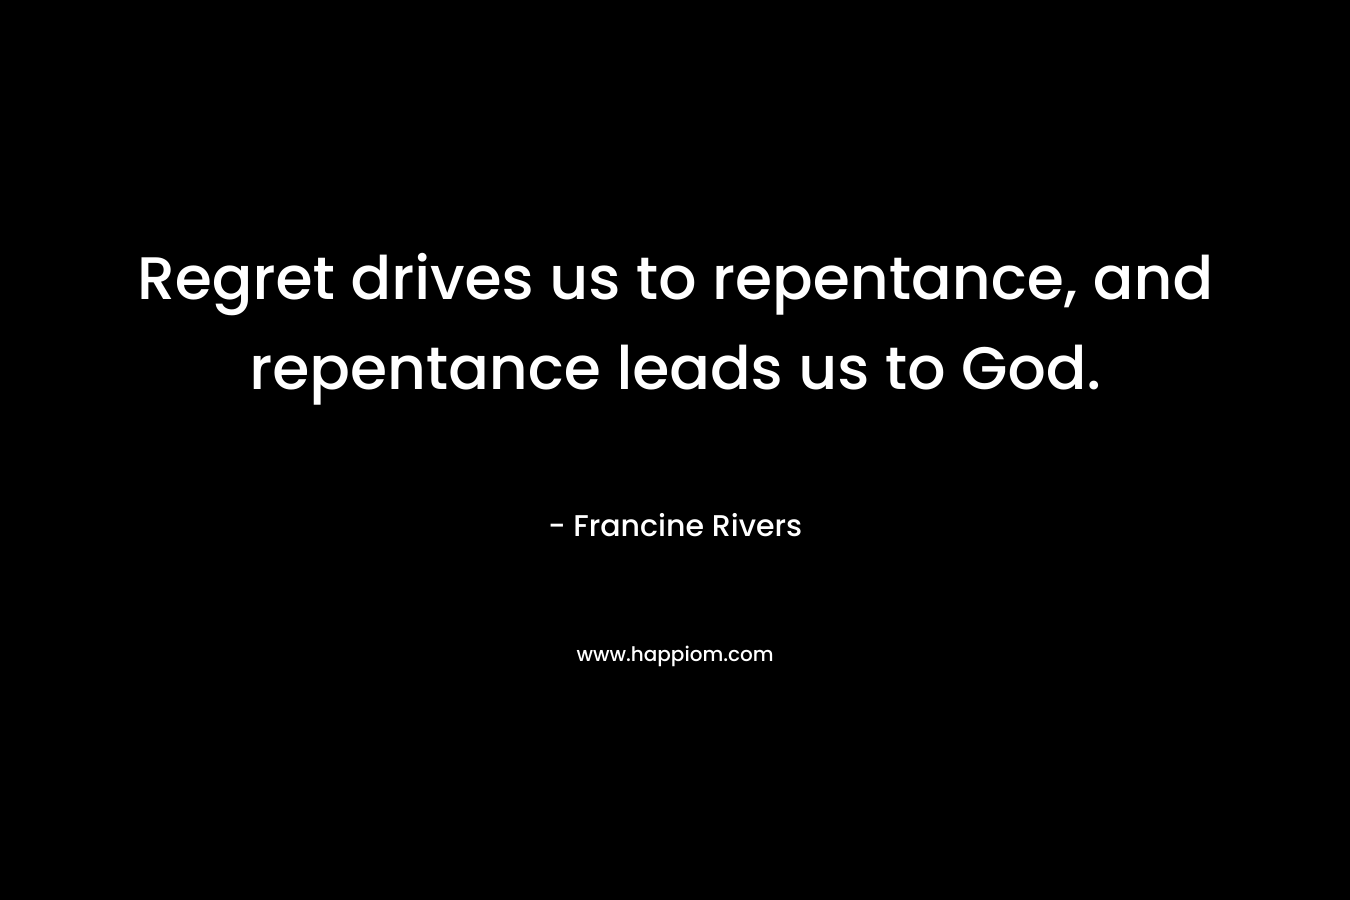 Regret drives us to repentance, and repentance leads us to God. – Francine Rivers